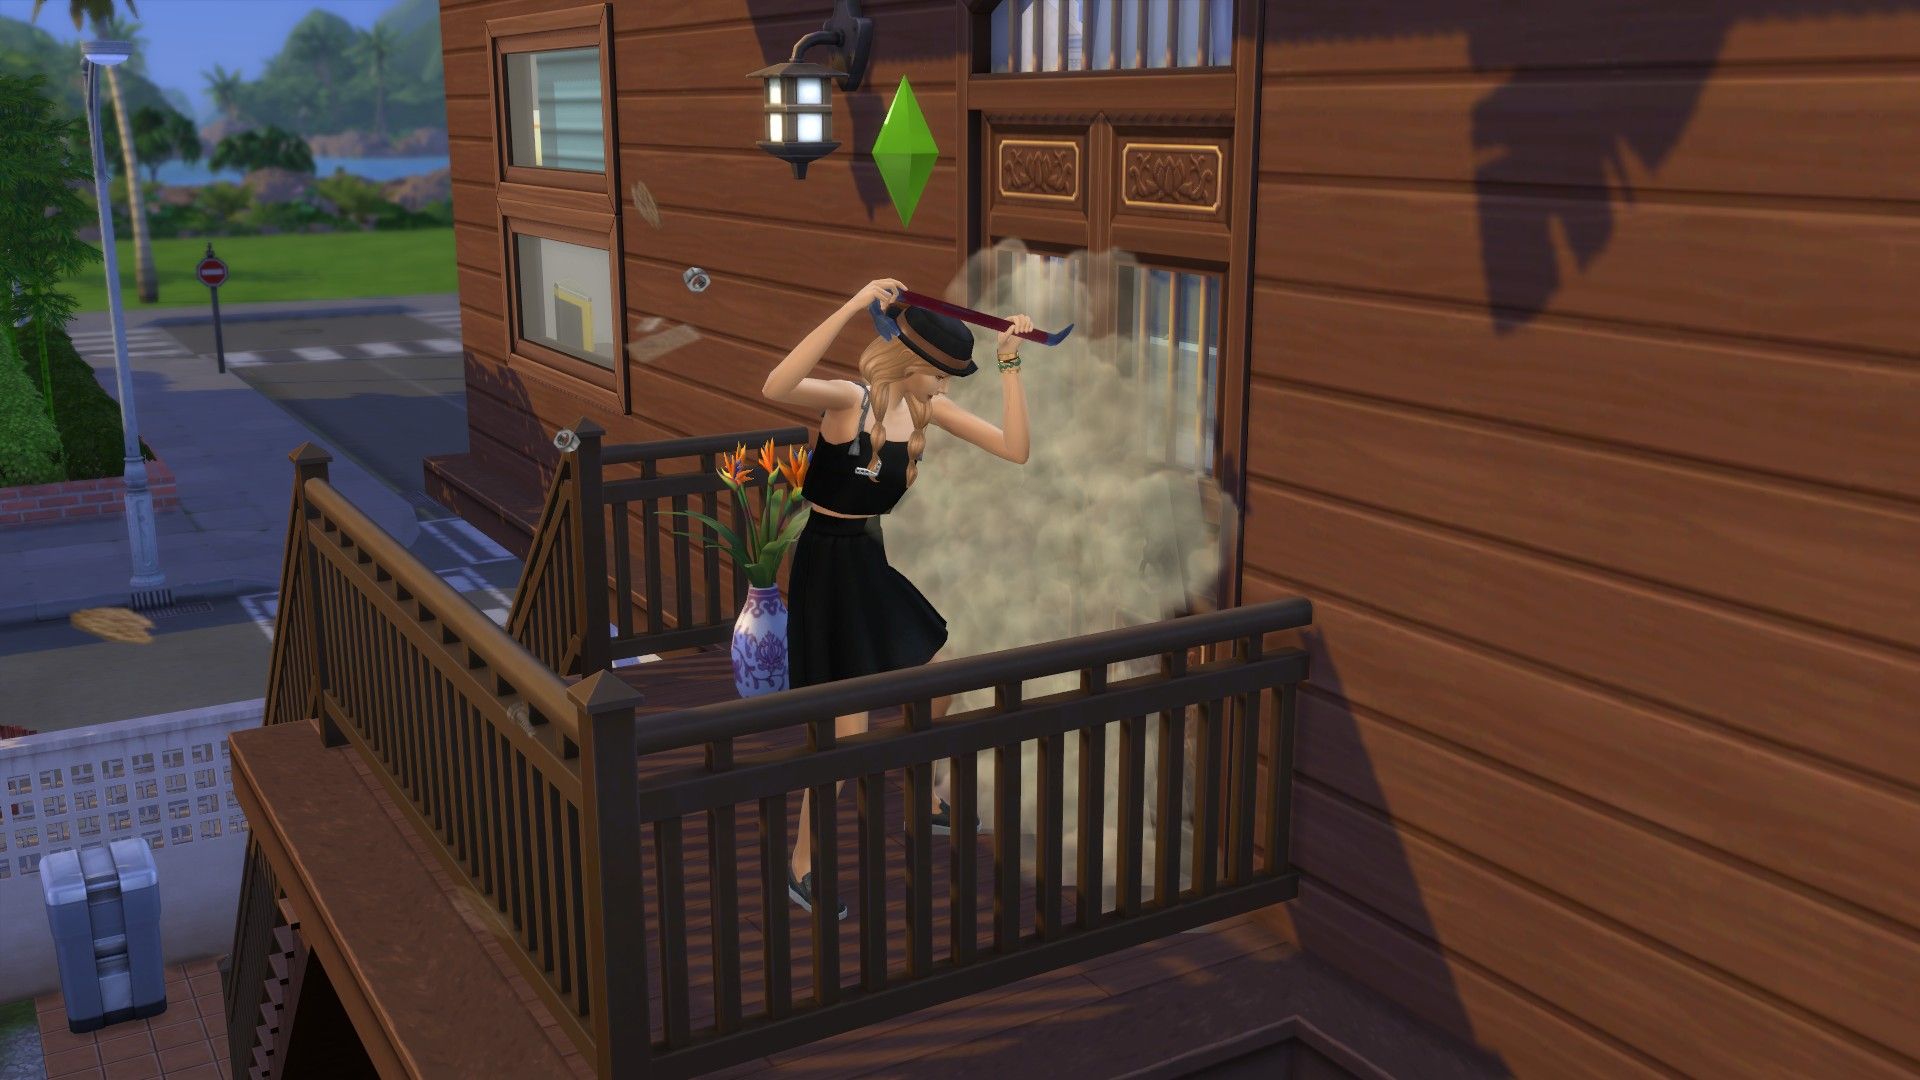 The Sims 4 female Sim breaking open a door with a crowbar in For Rent.